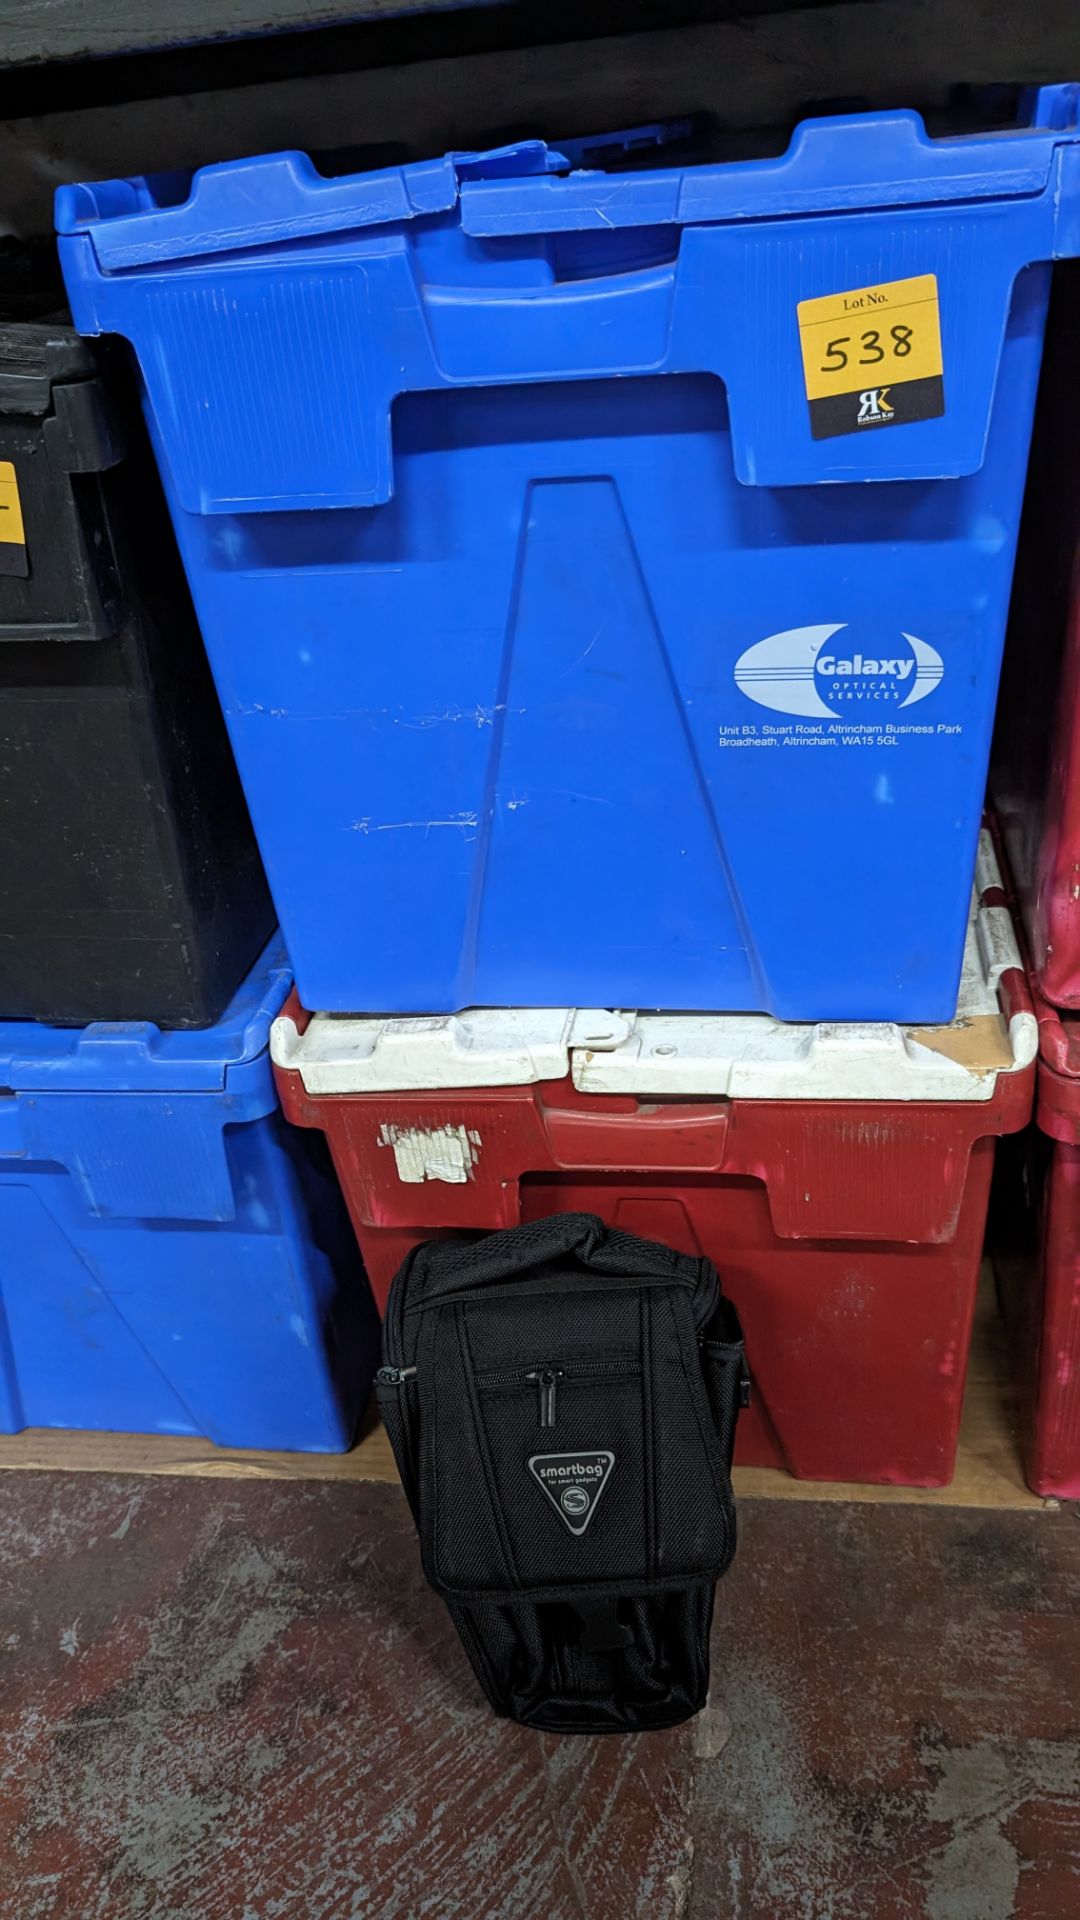 20 off camera bags - no straps. The contents of 2 crates - Image 2 of 5